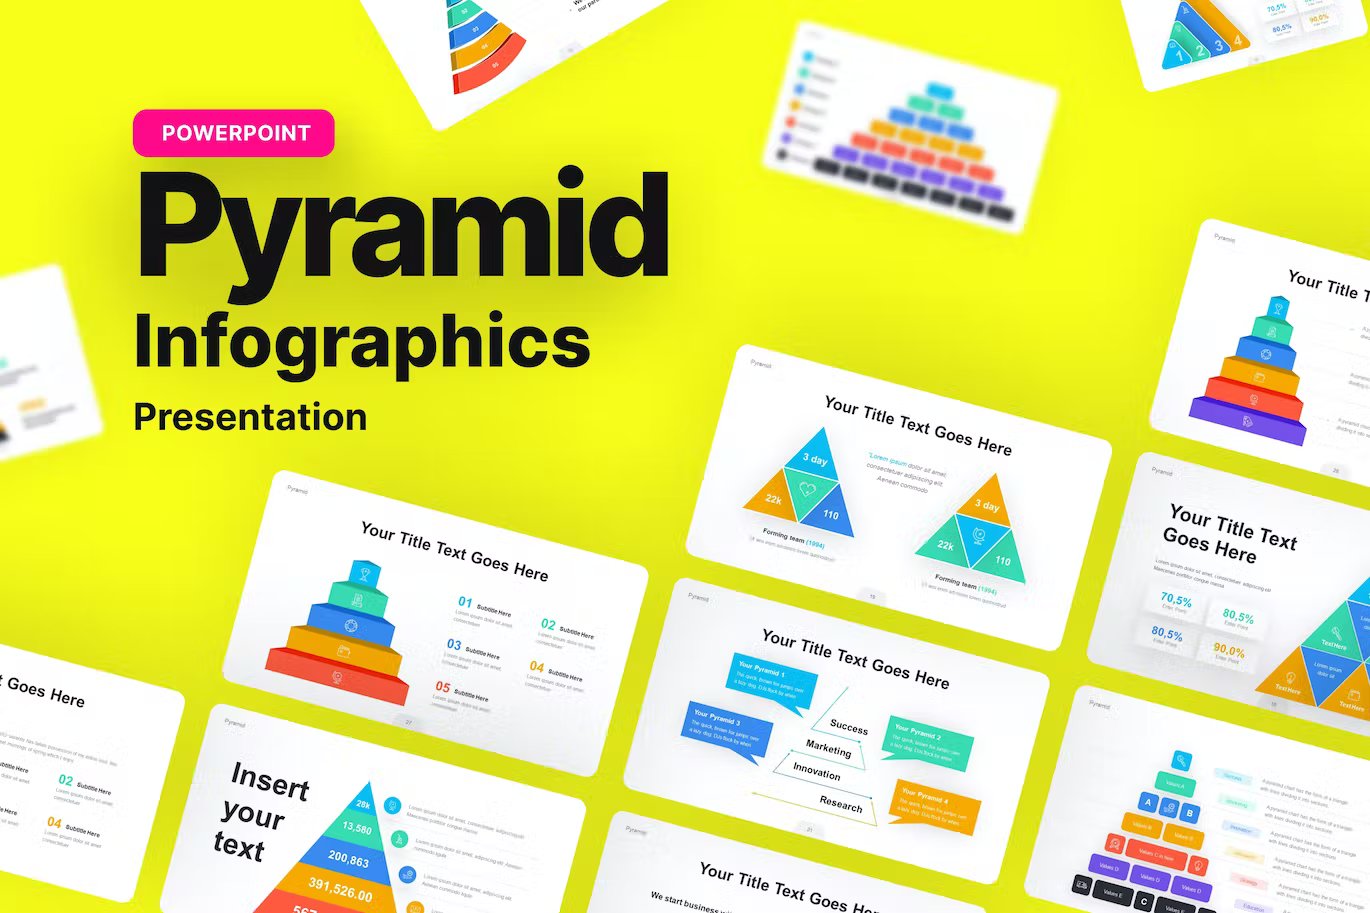 Black lettering "Pyramid Infographic Presentation" and different presentation templates on a yellow background.